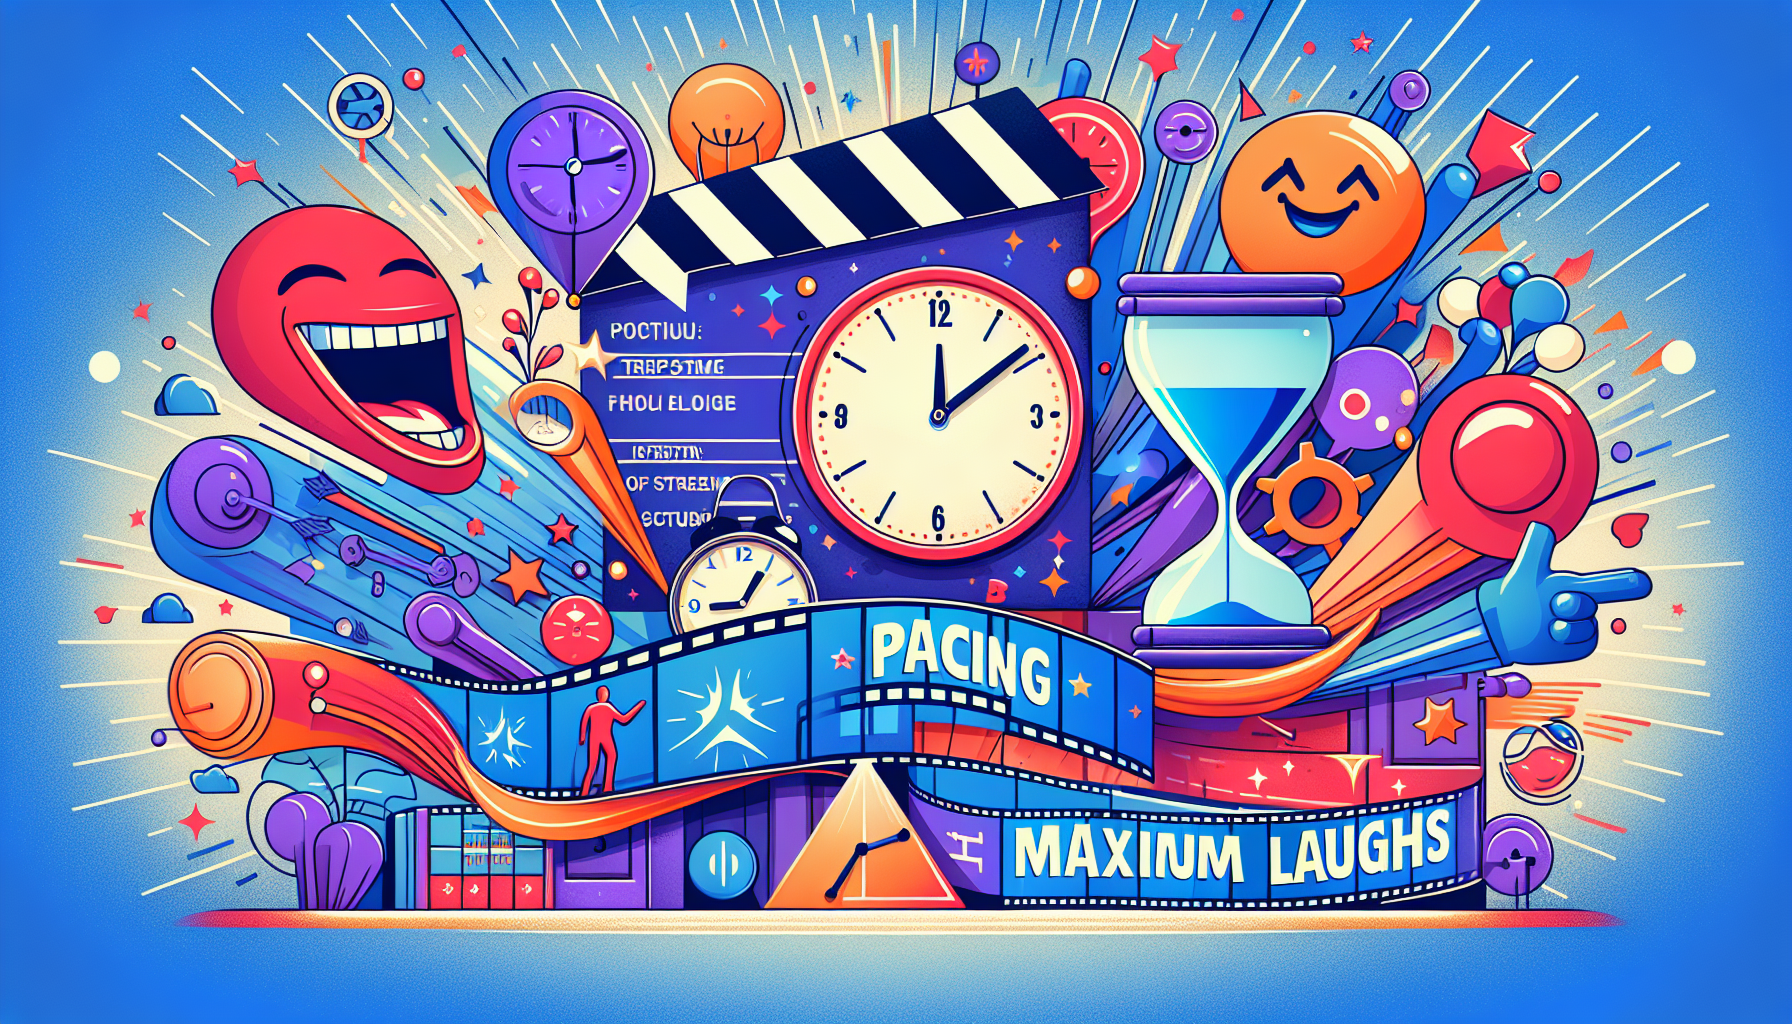 Create a modern and vibrant illustration that interprets the concept of 'Pacing for Maximum Laughs' in a comedy screenplay. This should include visual symbols of time, such as clocks or hourglasses, as well as comedic elements like oversized laughter bubbles integrated into a dynamic sequence. Depict a backdrop suggestive of a screenplay or film reel to tie the elements together, highlighting the keen interplay of timing and comedy. It should be devoid of any text.